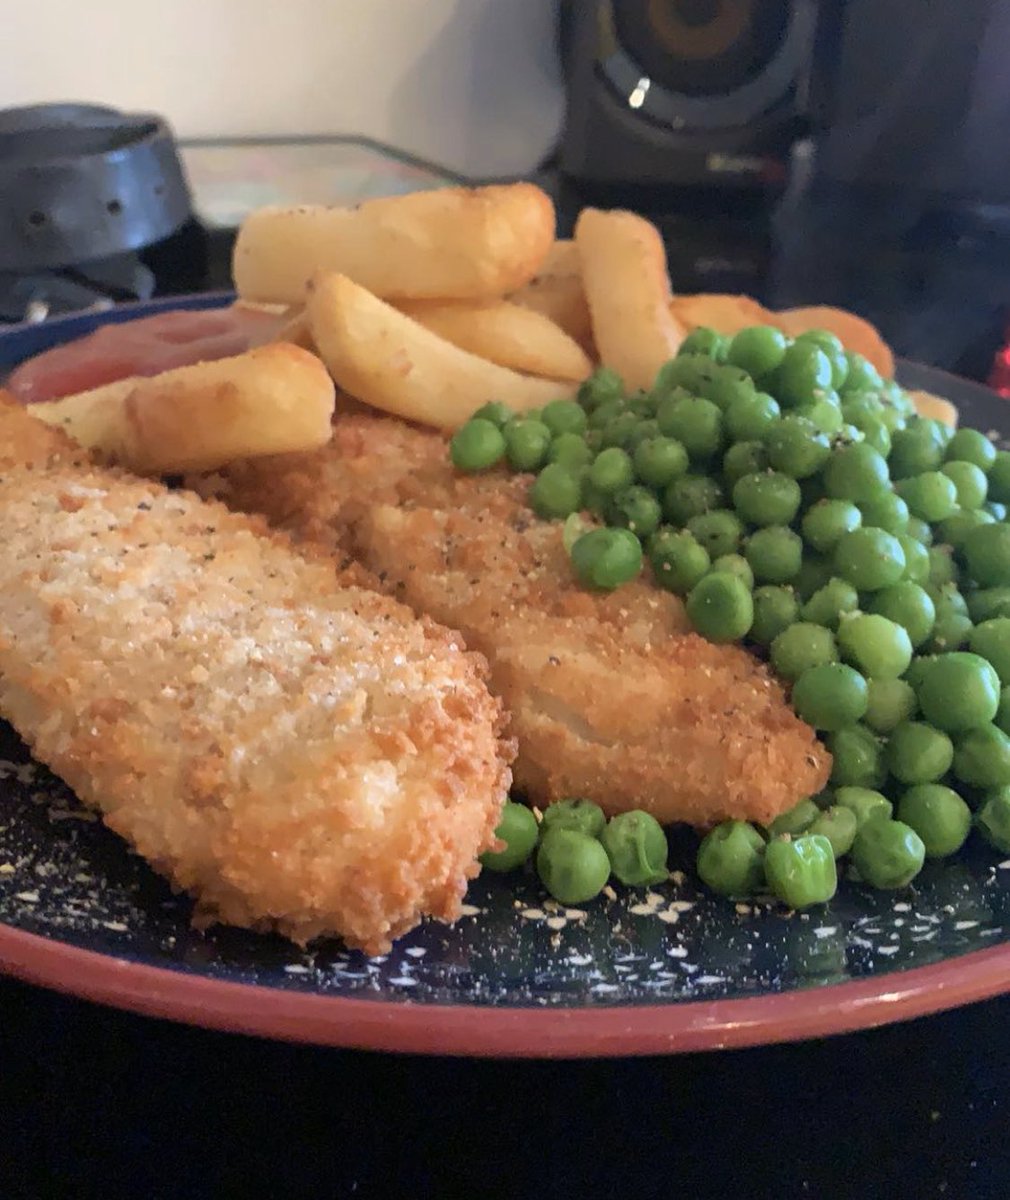  @tommy_ivatt fish and chips are decent so that’s a good start, but when you were told it was fish and chips for tea I bet you didn’t expect the freezer edition. Still a good effort tho 6.5/10 (tommy has everything with black pepper)